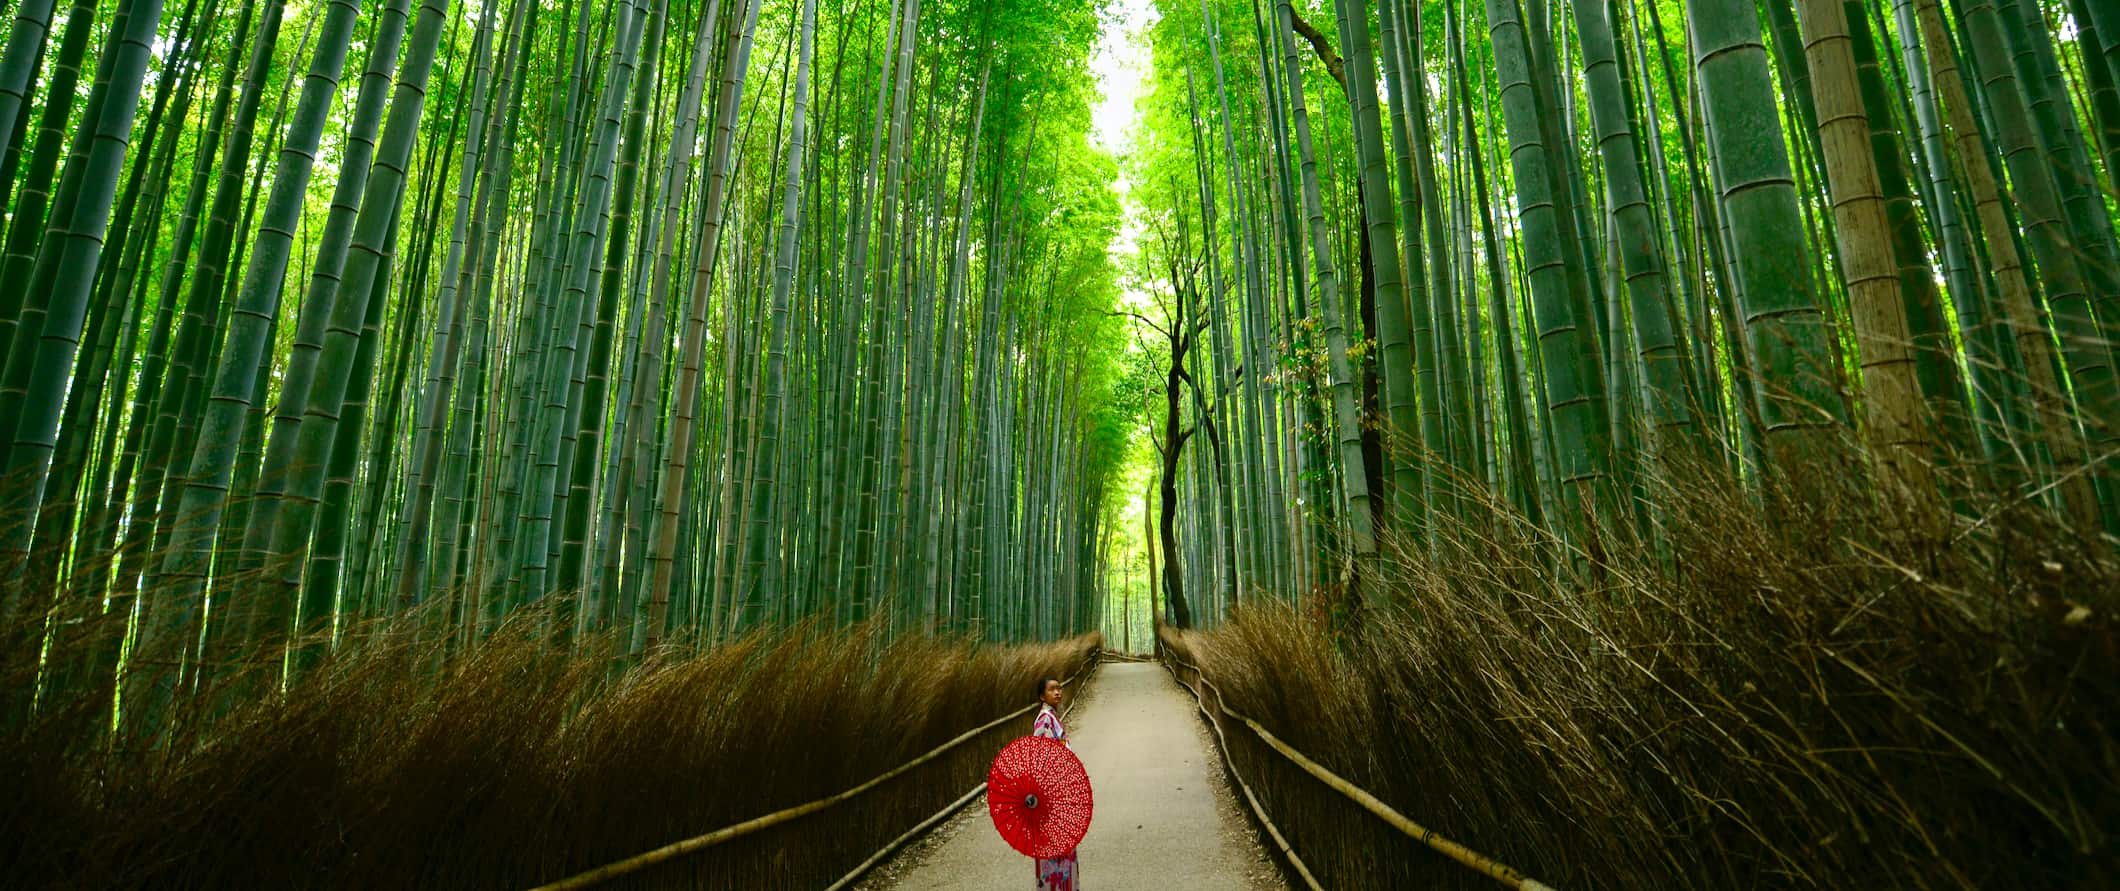 The famous bamboo forest in beautiful Kyoto, Japan